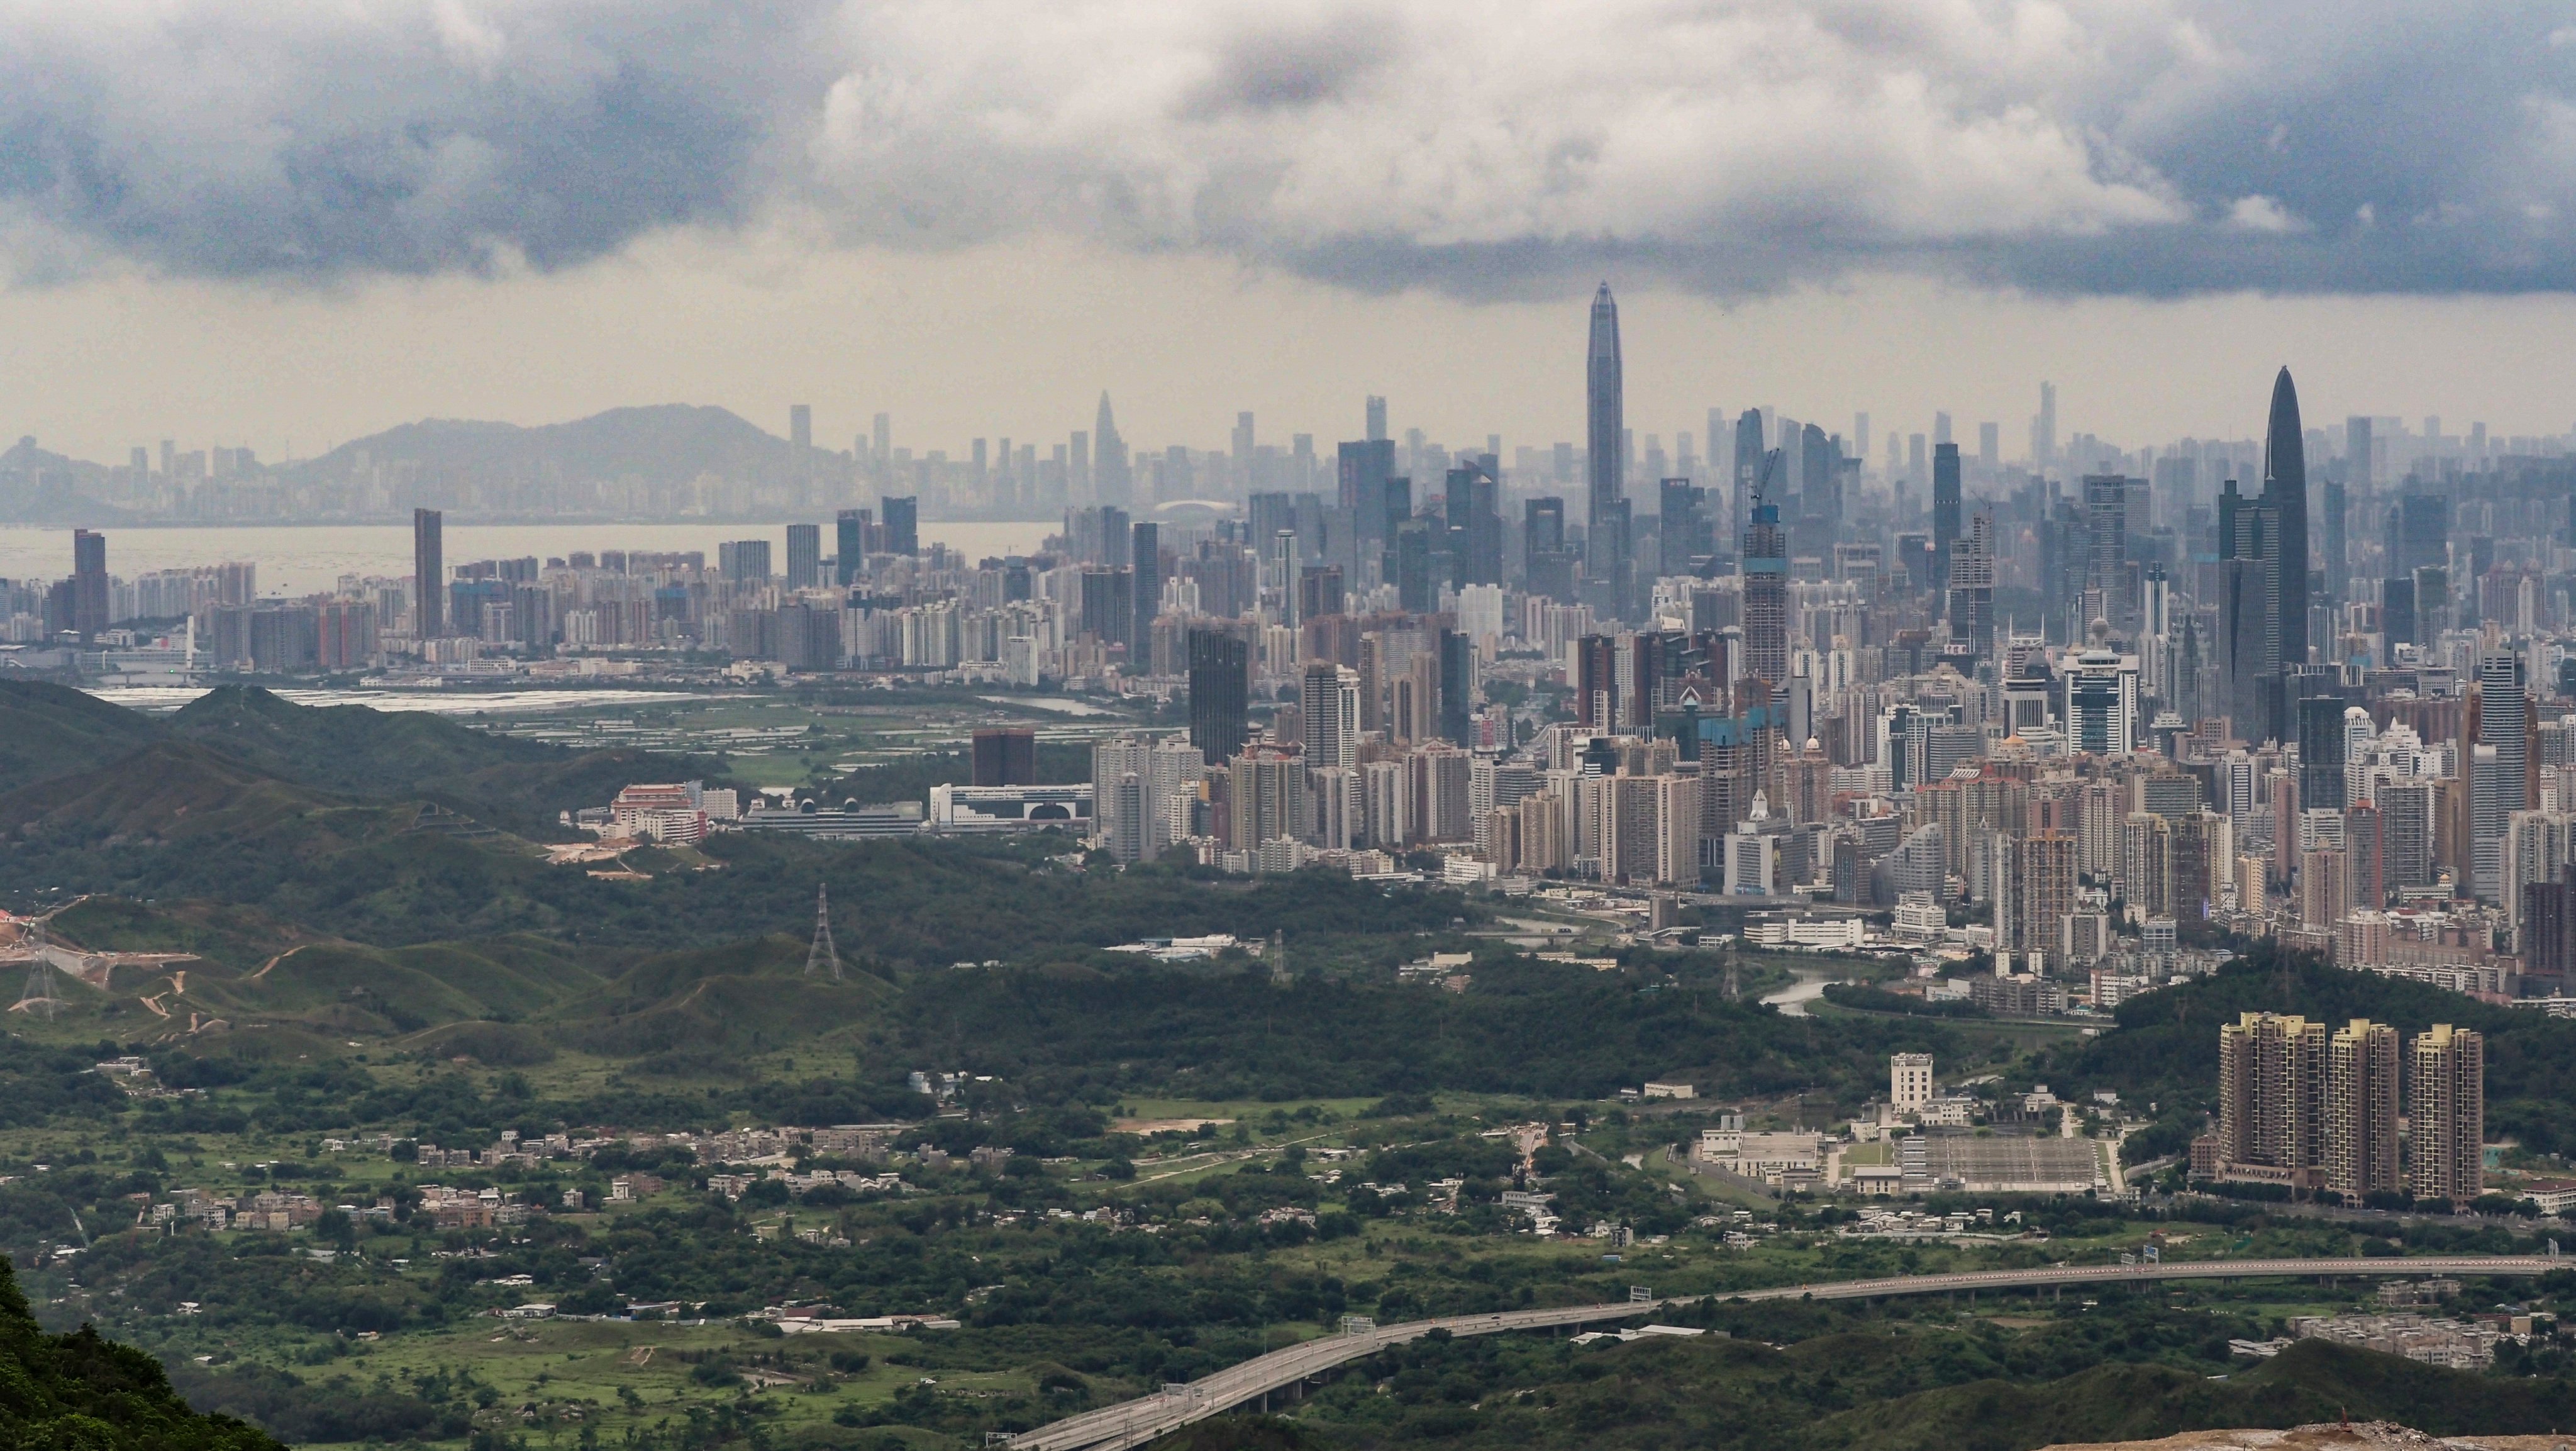 The Shenzhen area and the border with Hong Kong from Robin’s Nest, part of the area earmarked for major redevelopment. Photo: Martin Chan